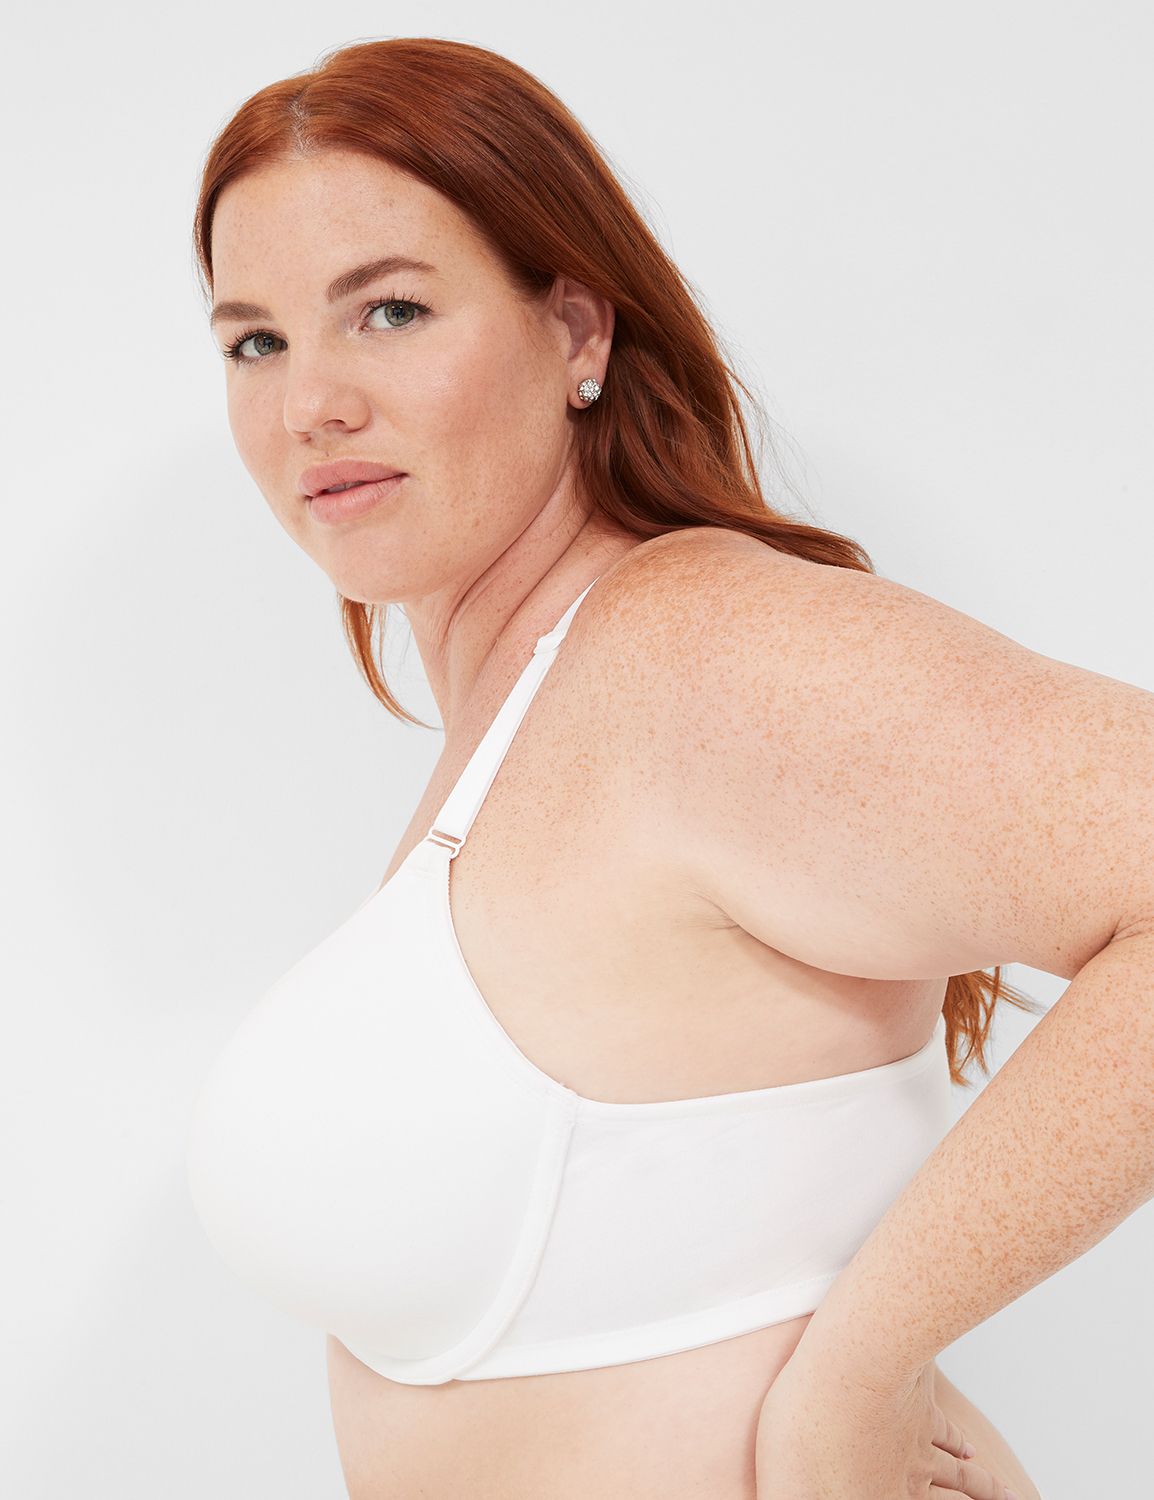 Cacique SALE ‼️ NWT Plus Size Padded Cotton Boost Plunge Wired Bra Size 44C  White - $32 New With Tags - From MCI